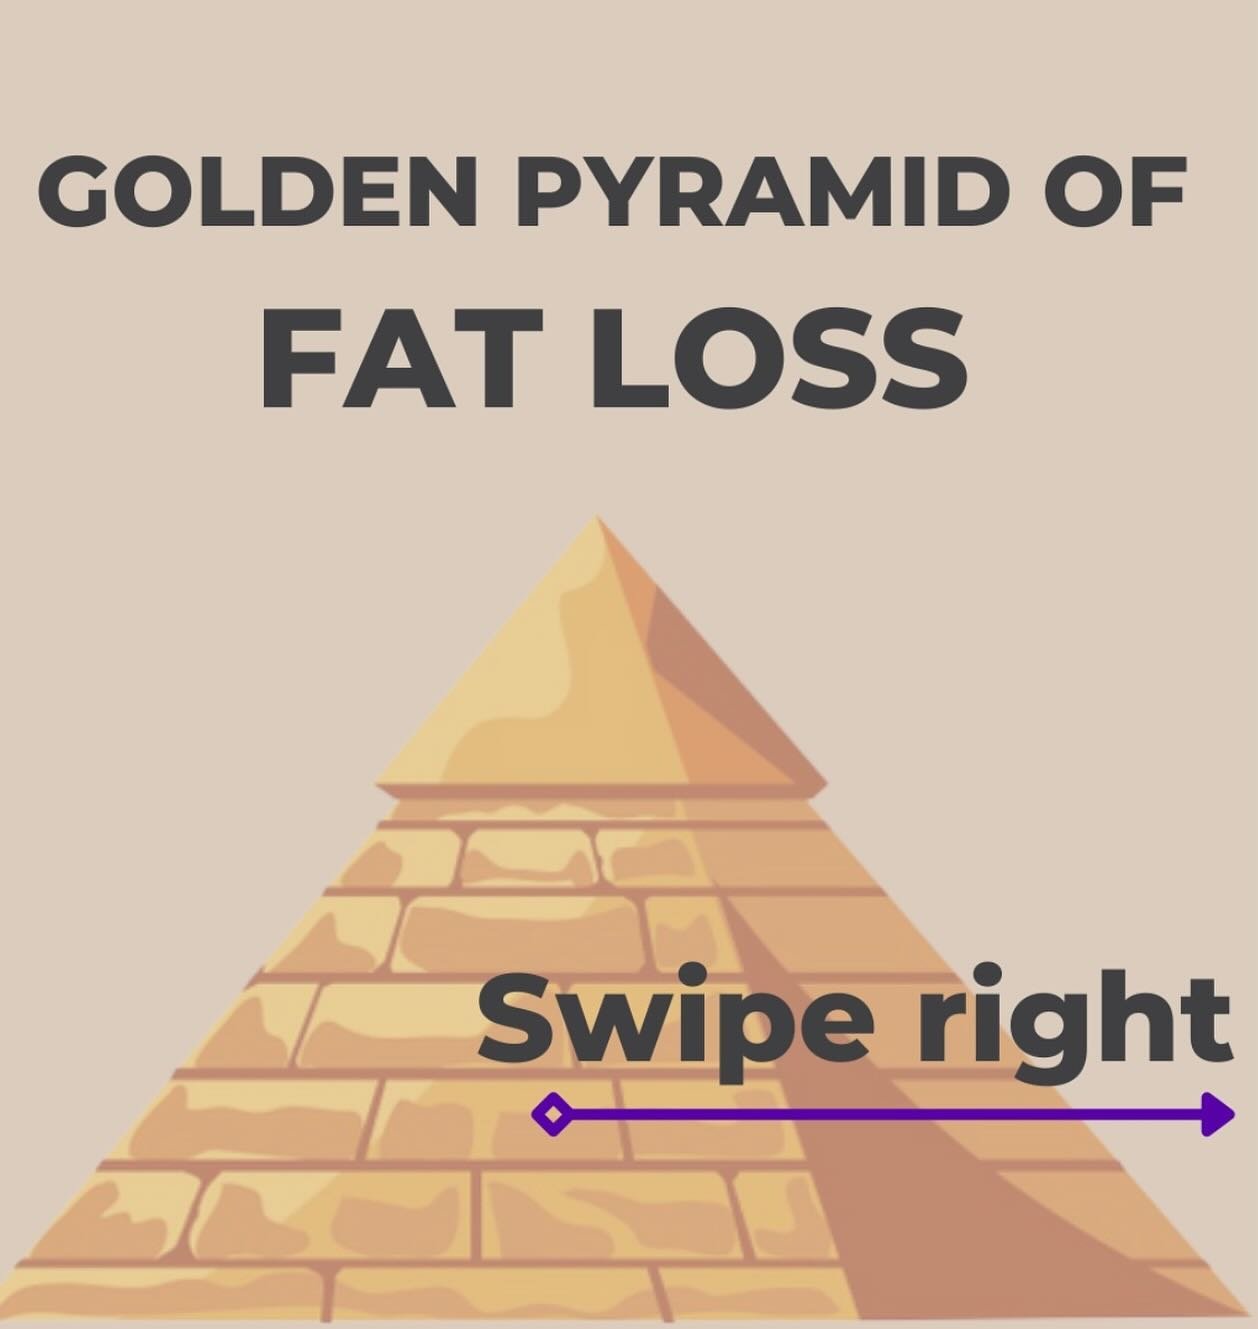 Introducing the Golden Pyramid of Fat Loss! 🌟 

These five pillars are key to achieving your fat loss goals:

🌟 Calorie Deficit: 

At the base of the pyramid is the foundation of fat loss. To lose fat, you need to consume fewer calories than your b